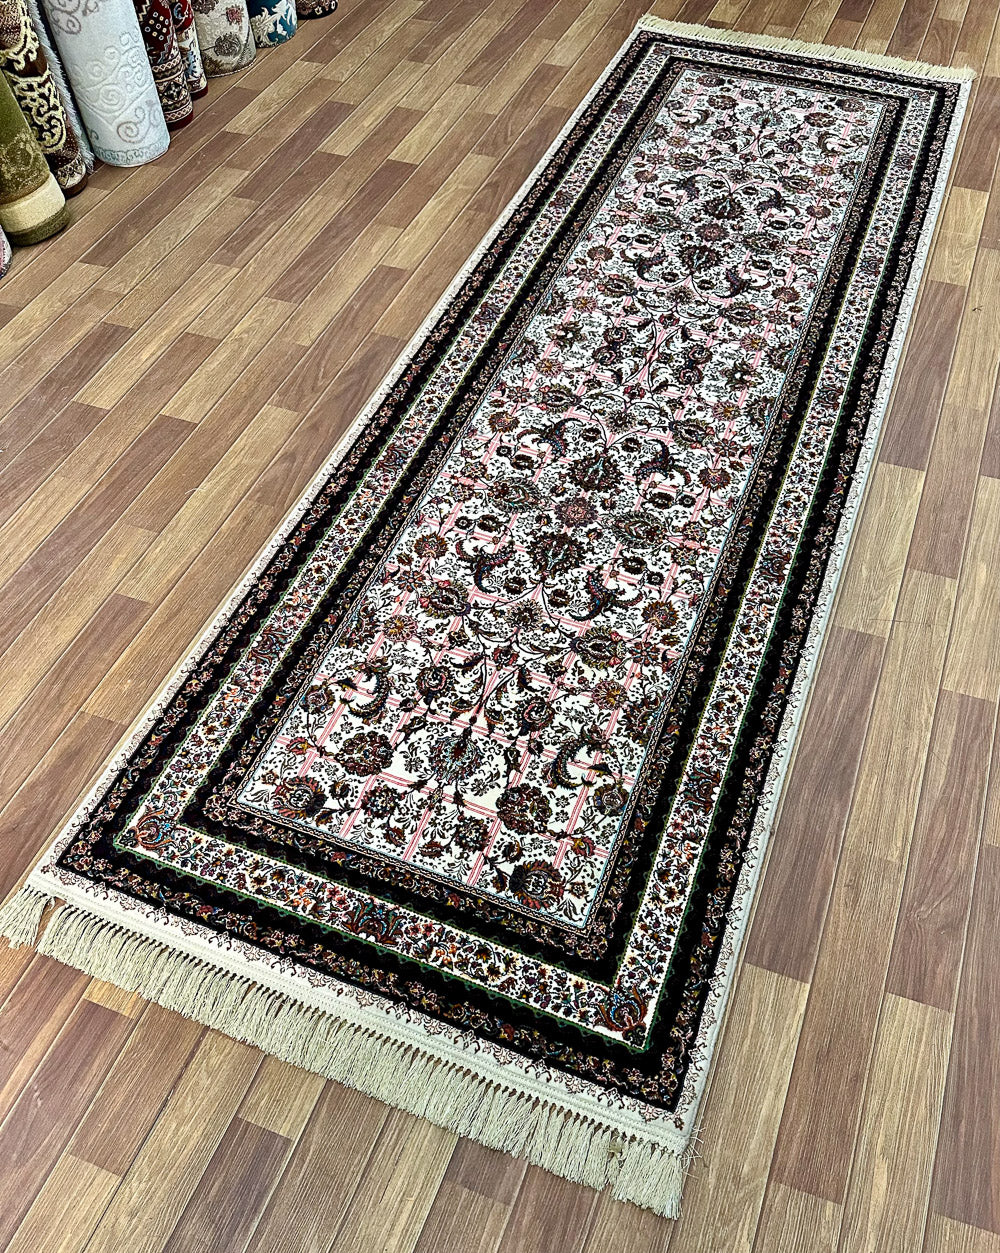 3 ft x 10 ft - Runner - Persian 1000 Reeds - Shahkar 3 - Beige and Black with Multi Colors